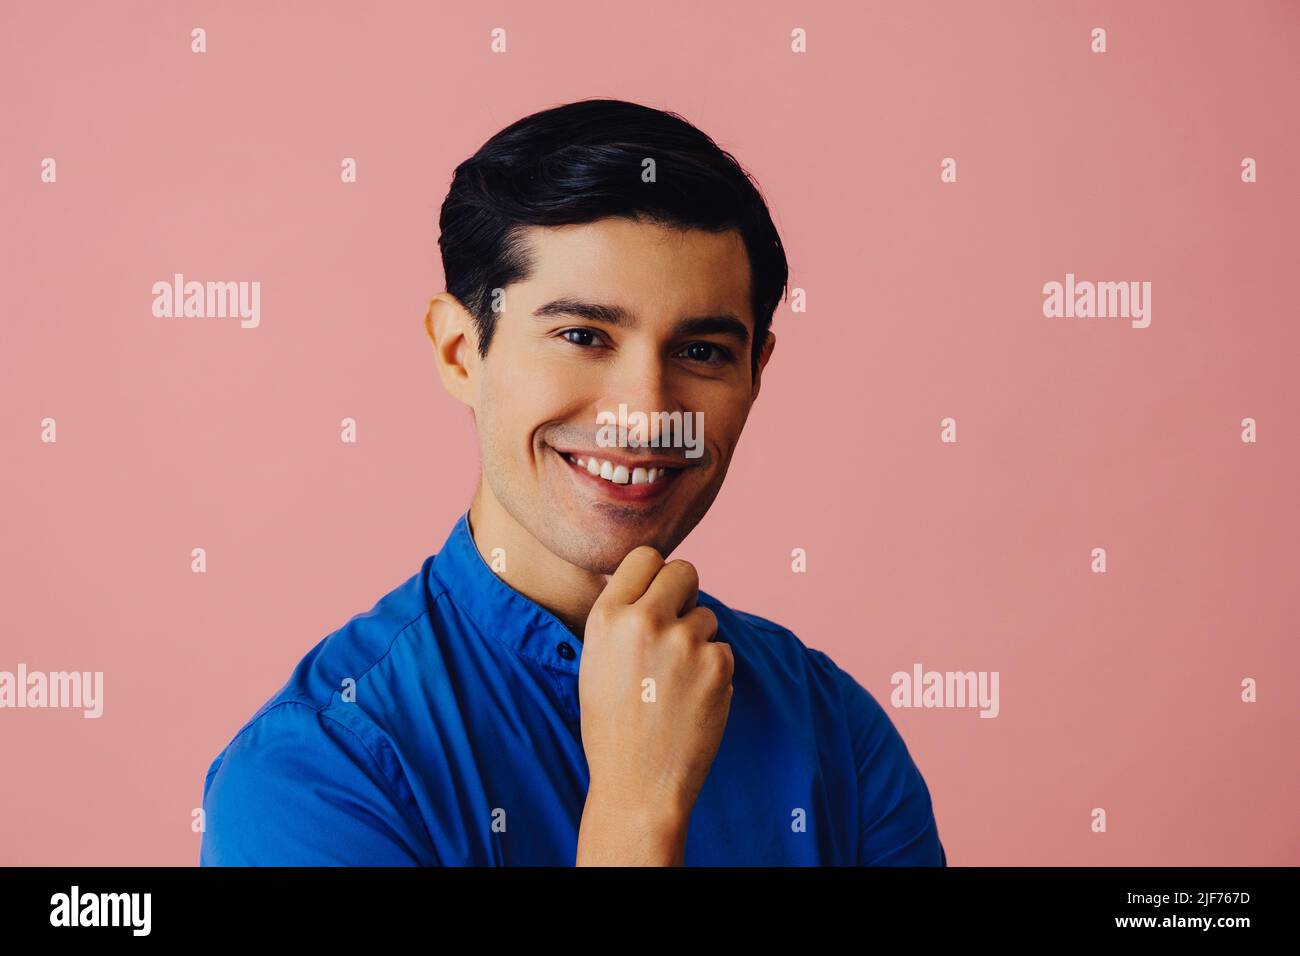 Headshot smiling handsome young adult latino man with hand on chin black hair and blue shirt over pink background looking at camera studio shot Stock Photo